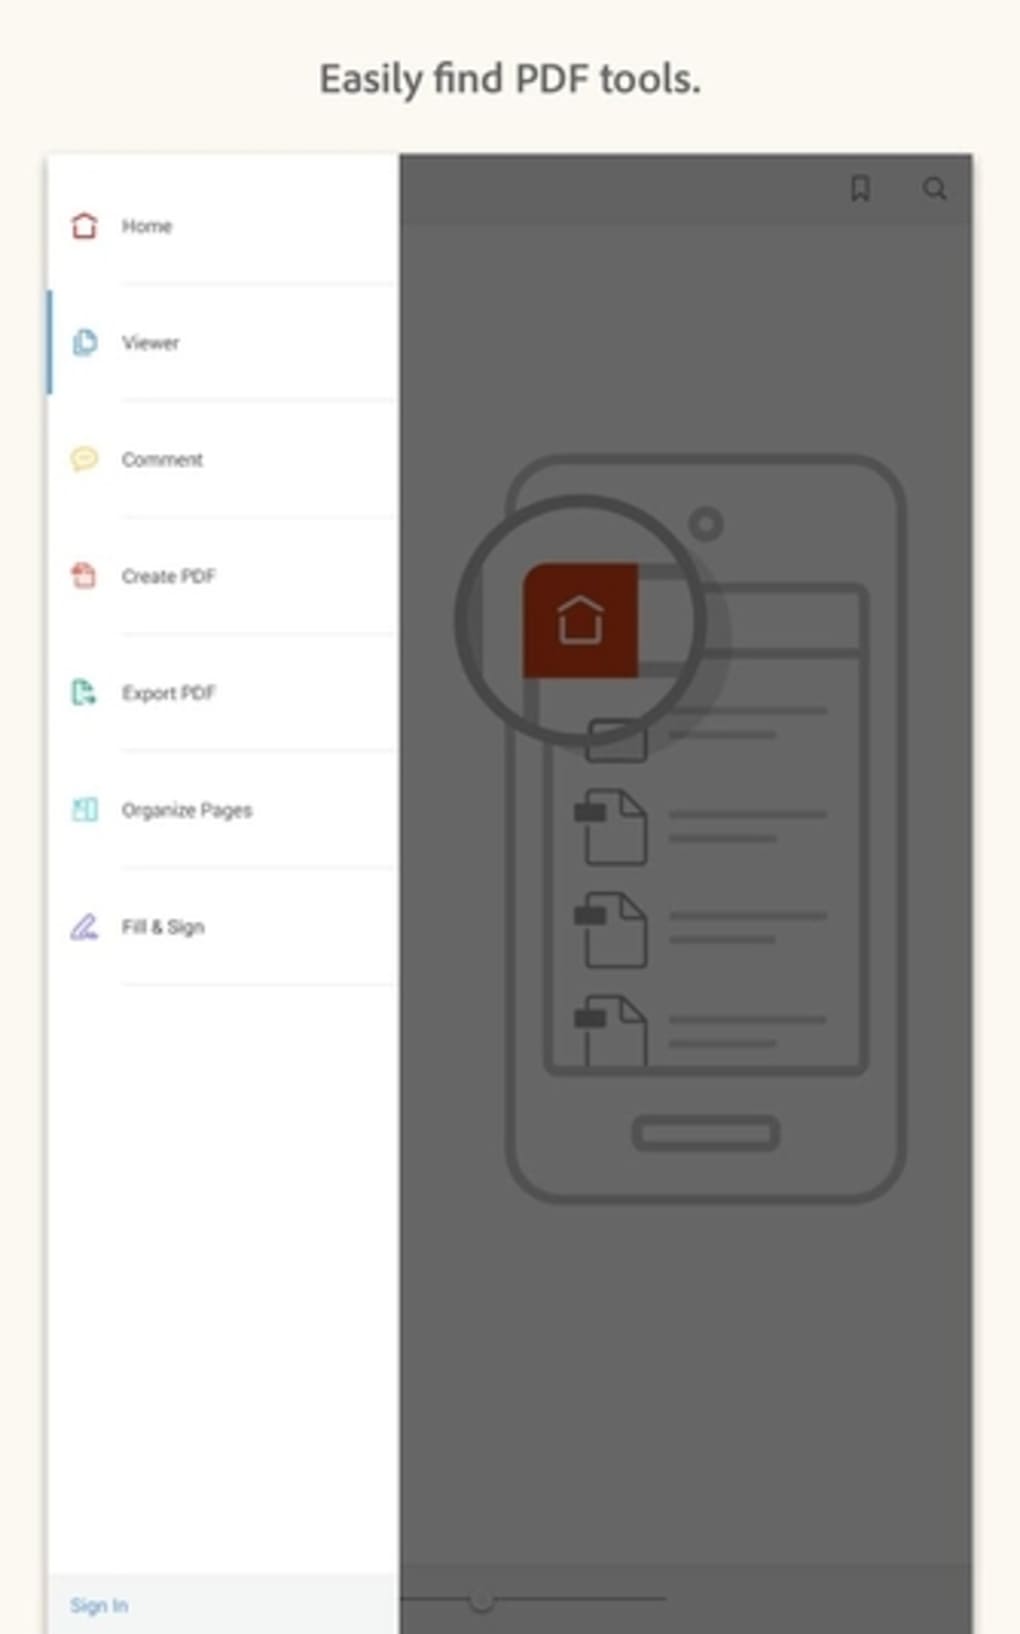 acrobat reader for android 4.0 free download